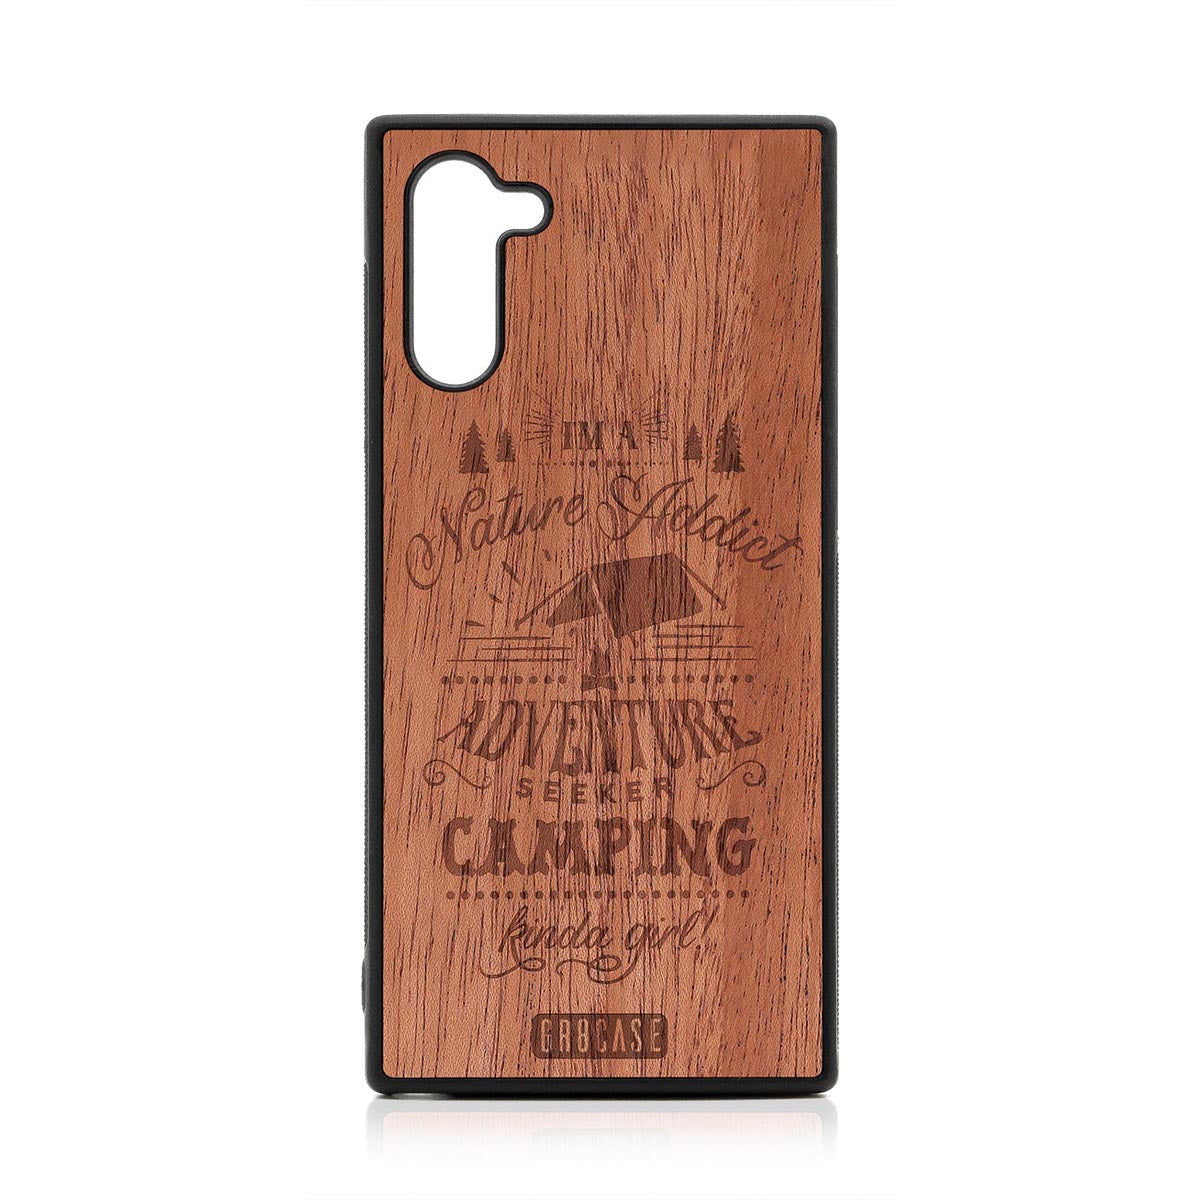 I'm A Nature Addict Adventure Seeker Camping Kinda Girl Design Wood Case Samsung Galaxy Note 10 by GR8CASE